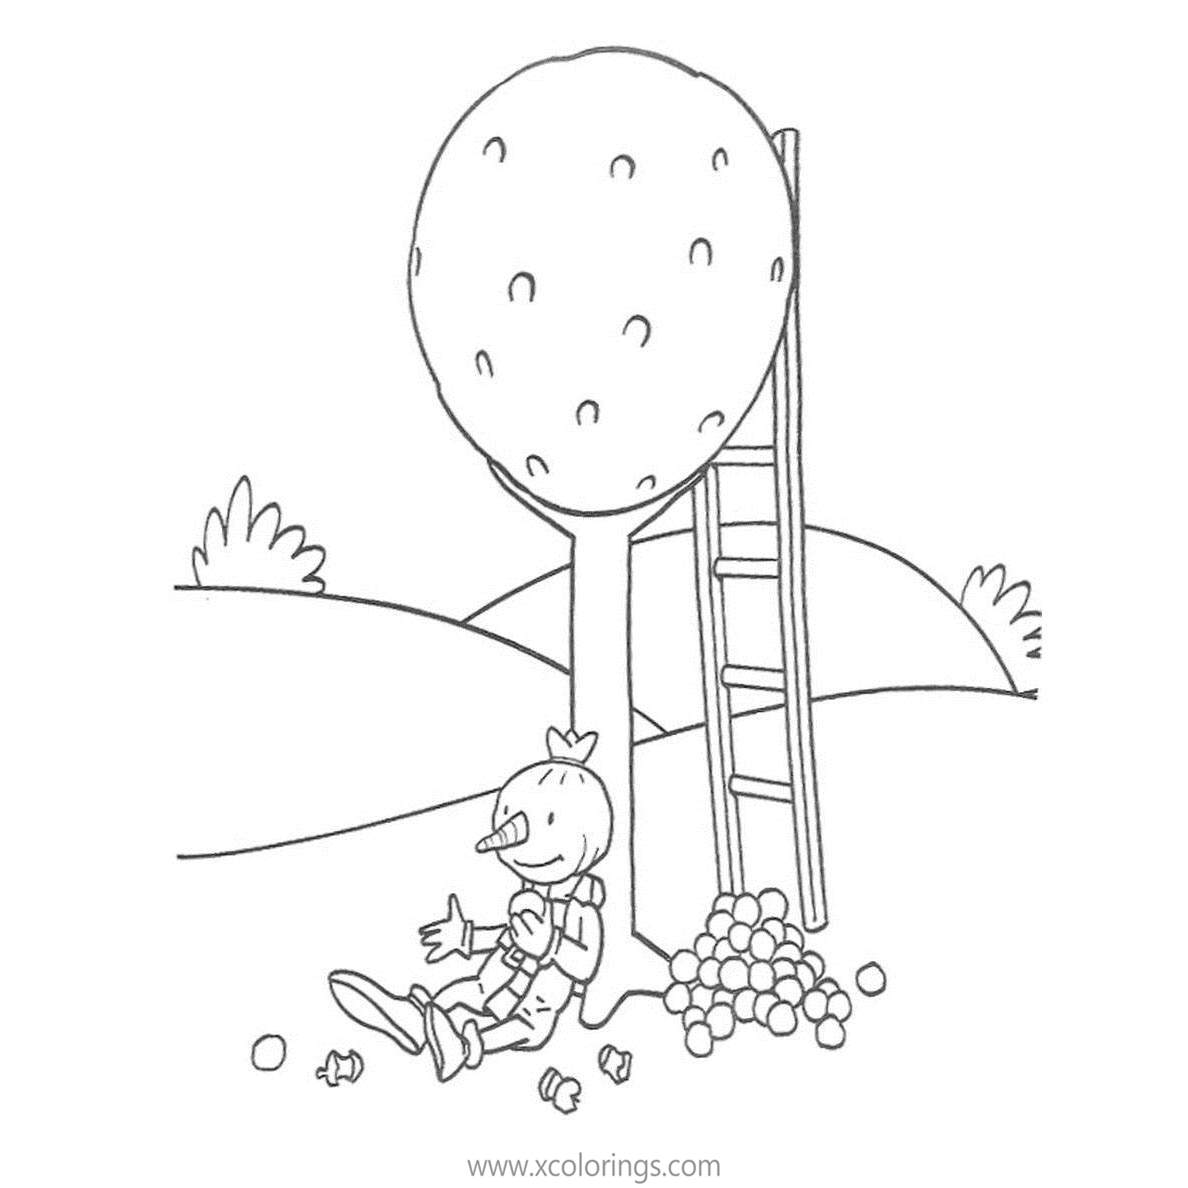 Free Bob the Builder Coloring Pages Spud Under the Tree printable